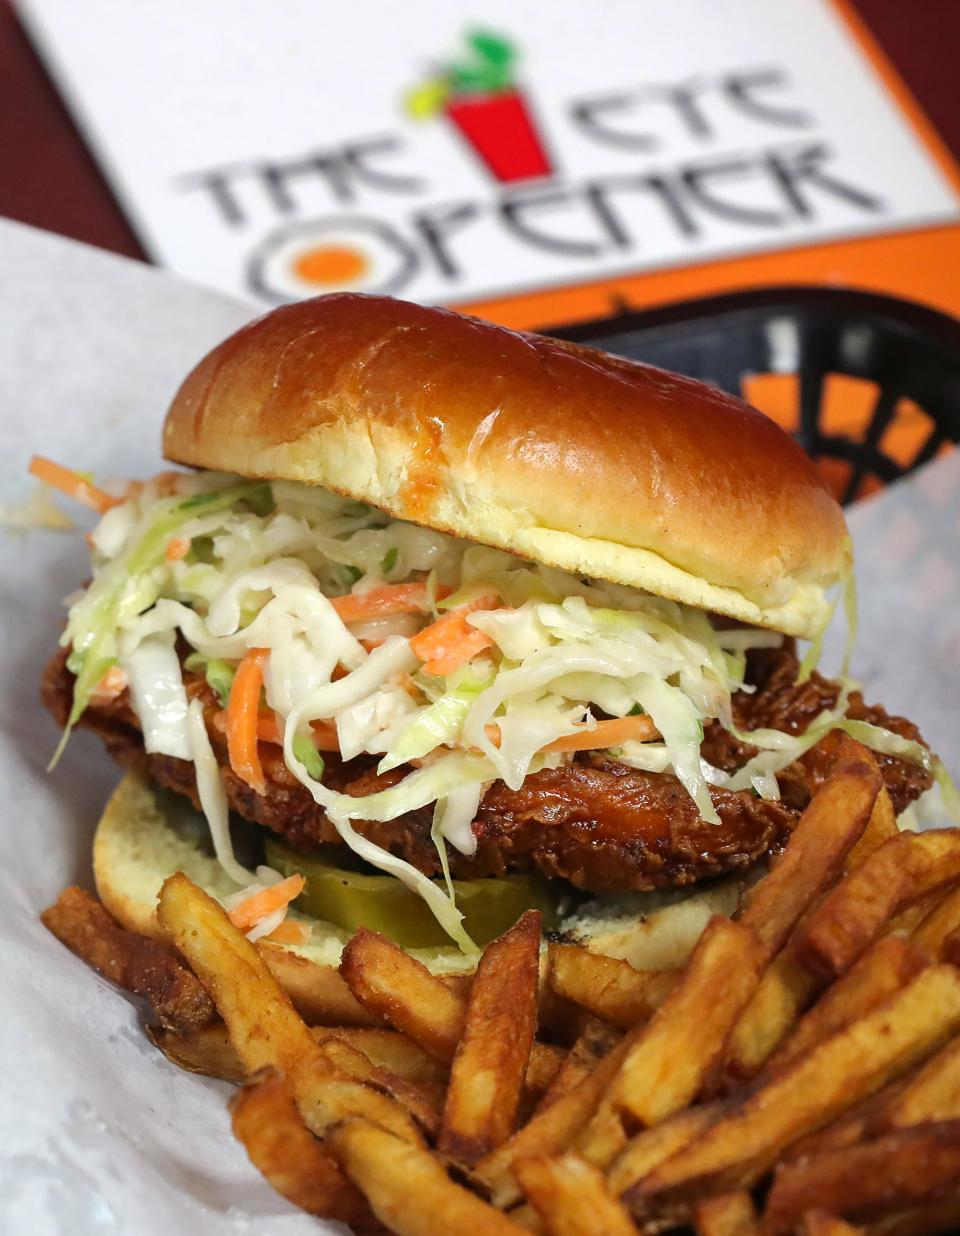 The Eye Opener isn't open for just breakfast and lunch anymore. You can now grab the customer-favorite honey hot chicken sandwich, topped with slaw and pickles and served with fries, for dinner rom 4 p.m. to 8:30 p.m. Monday through Friday.